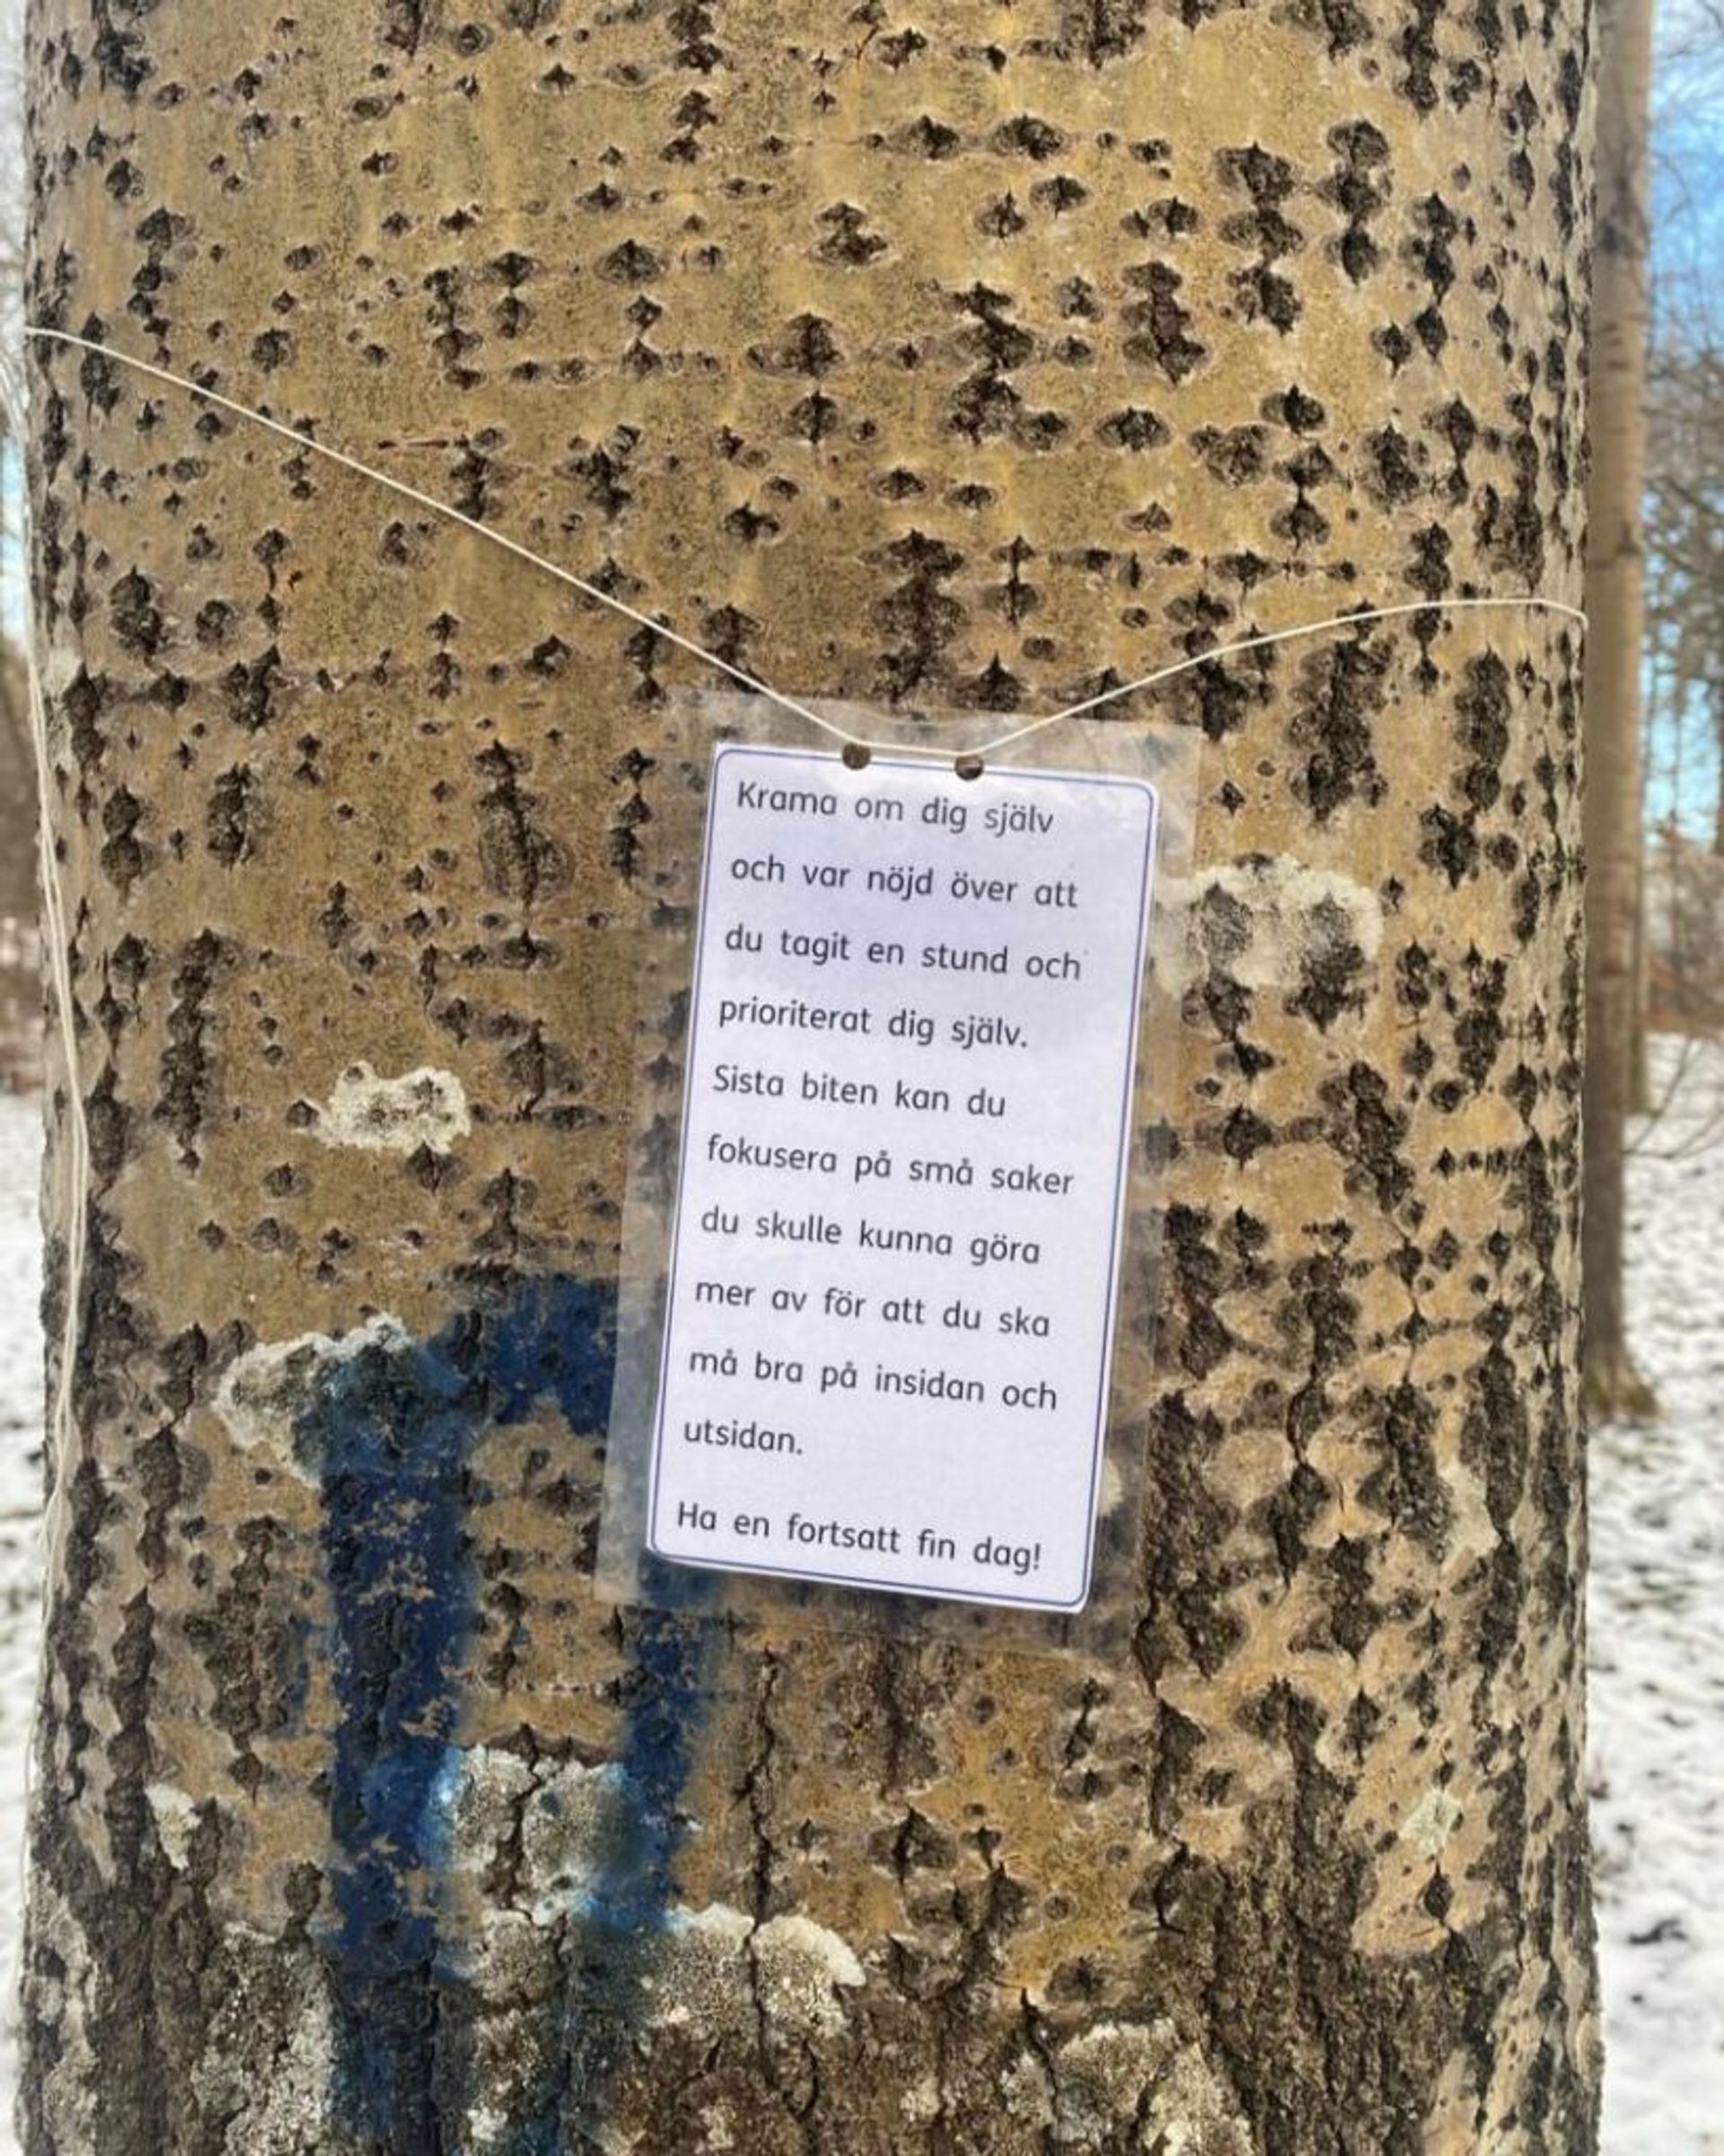 A mindful quote tied to a tree in a Swedish forest during winter.